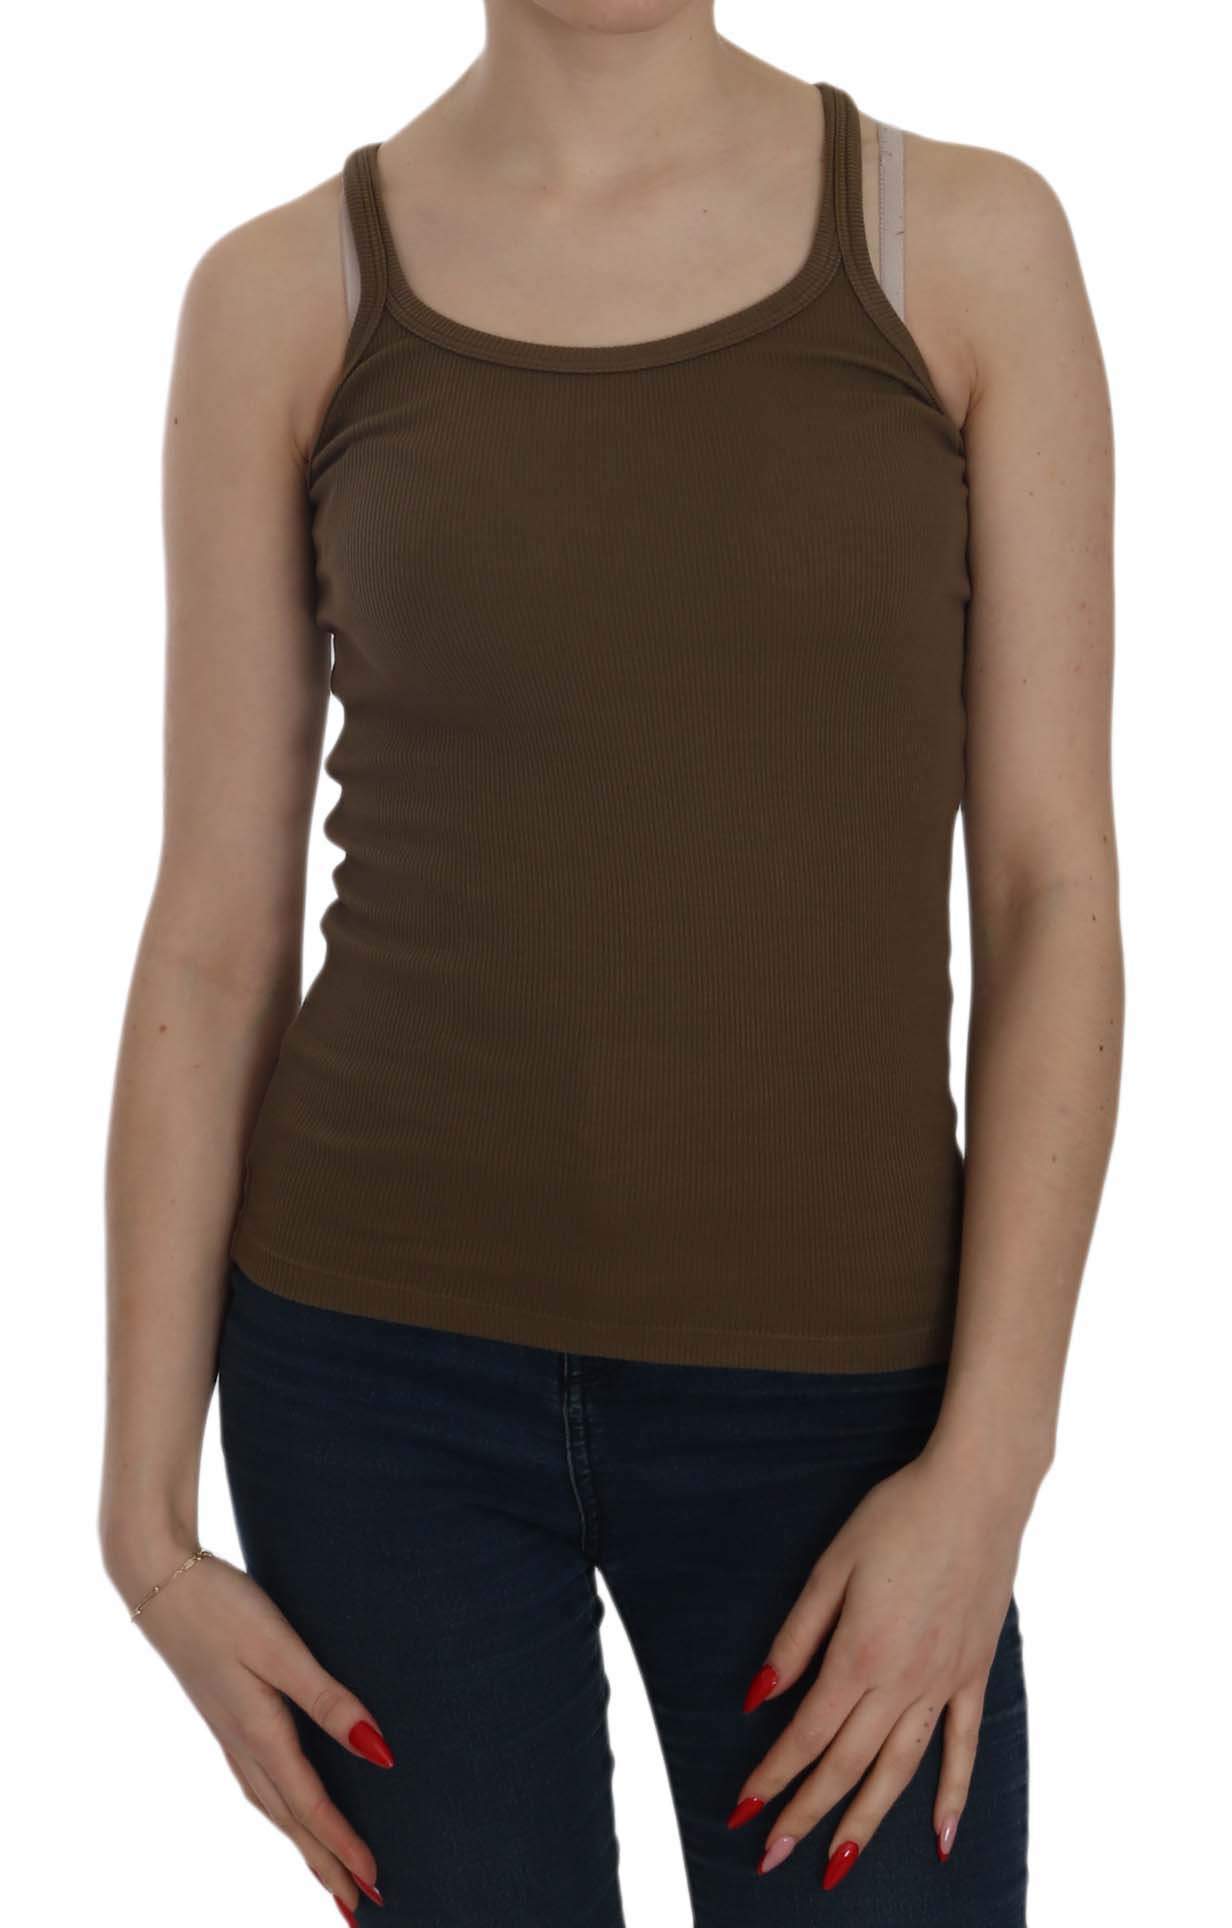 PINK MEMORIES  Sleeveless Spaghetti Strap Blouse Top #women, Brown, Catch, feed-agegroup-adult, feed-color-brown, feed-color-pink, feed-gender-female, feed-size-IT42|M, feed-size-IT44|L, feed-size-IT46|XL, Gender_Women, IT42|M, IT44|L, IT46|XL, Kogan, PINK MEMORIES, Tops & T-Shirts - Women - Clothing, Women - New Arrivals at SEYMAYKA